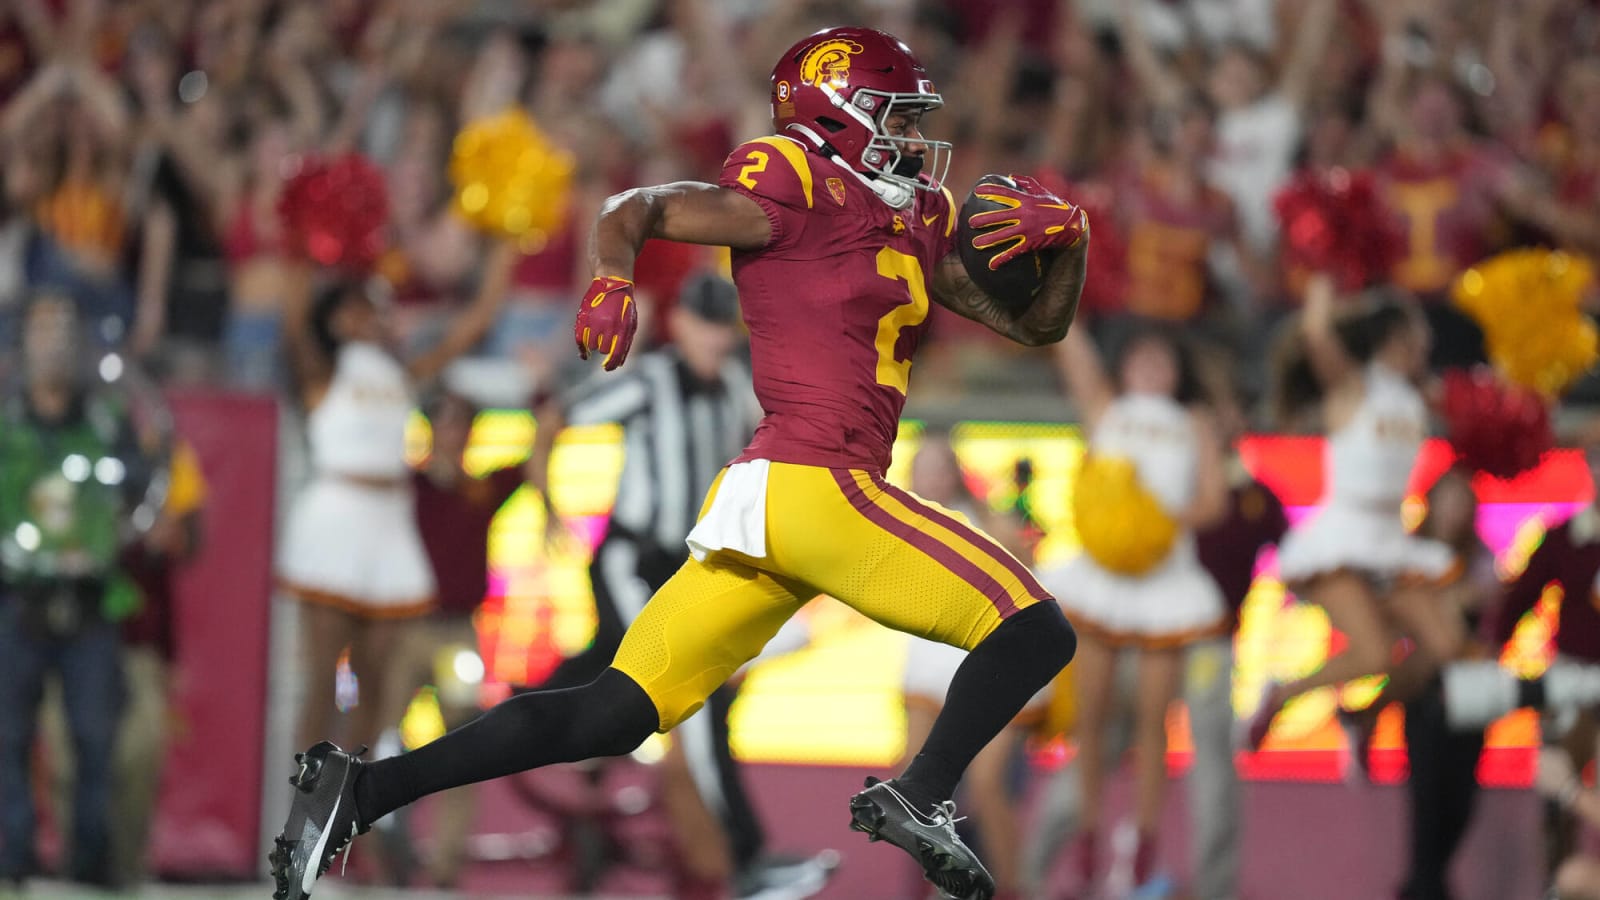 How to watch USC Trojans football in